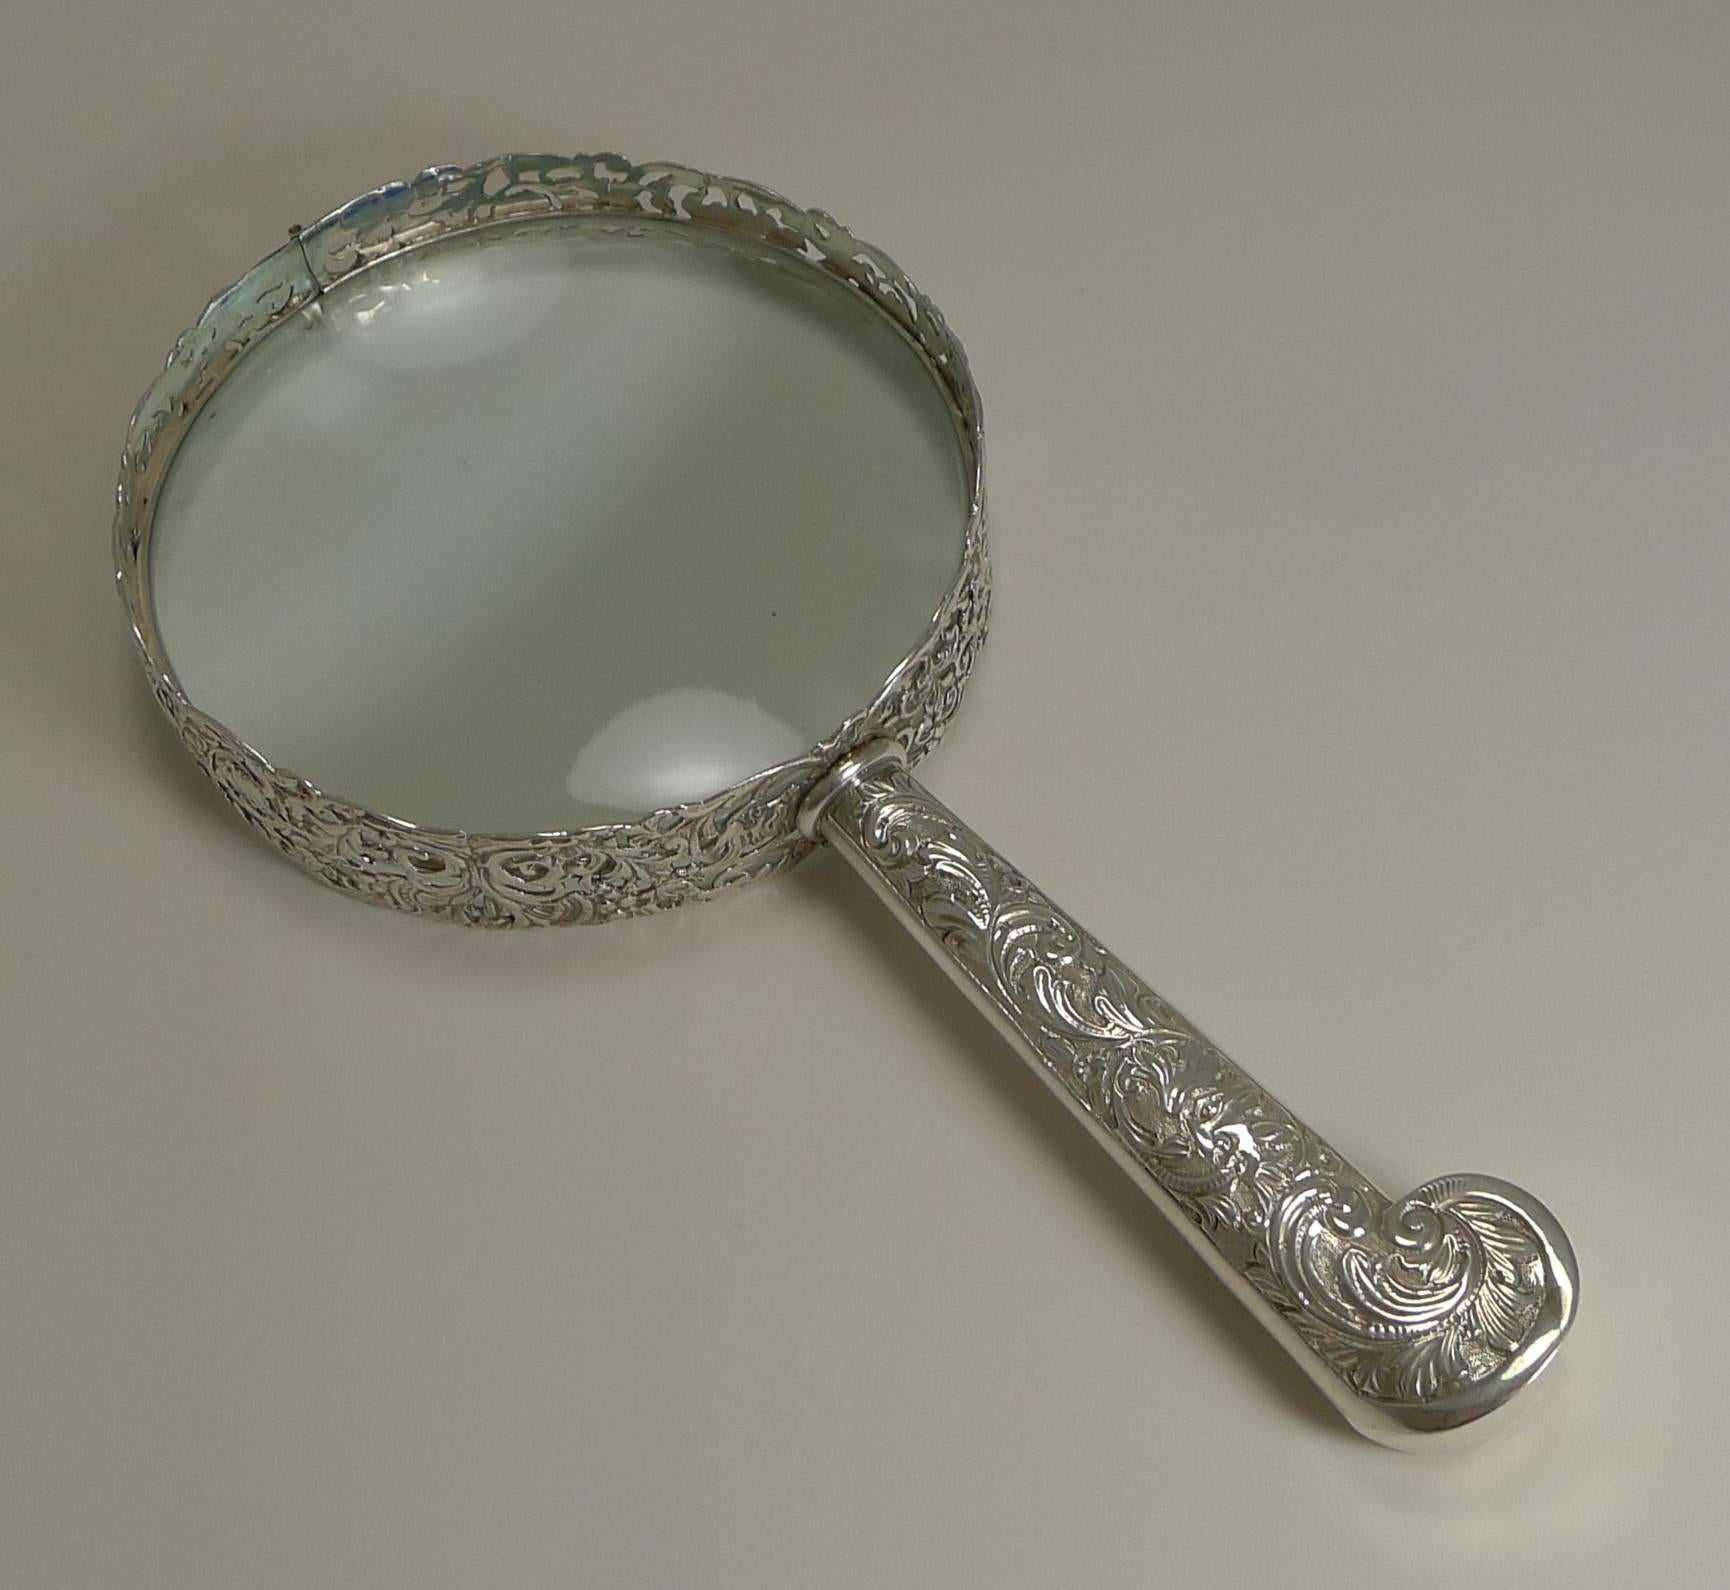 Late 19th Century Huge Antique English Sterling Silver Magnifying Glass by Samuel Jacob, 1897